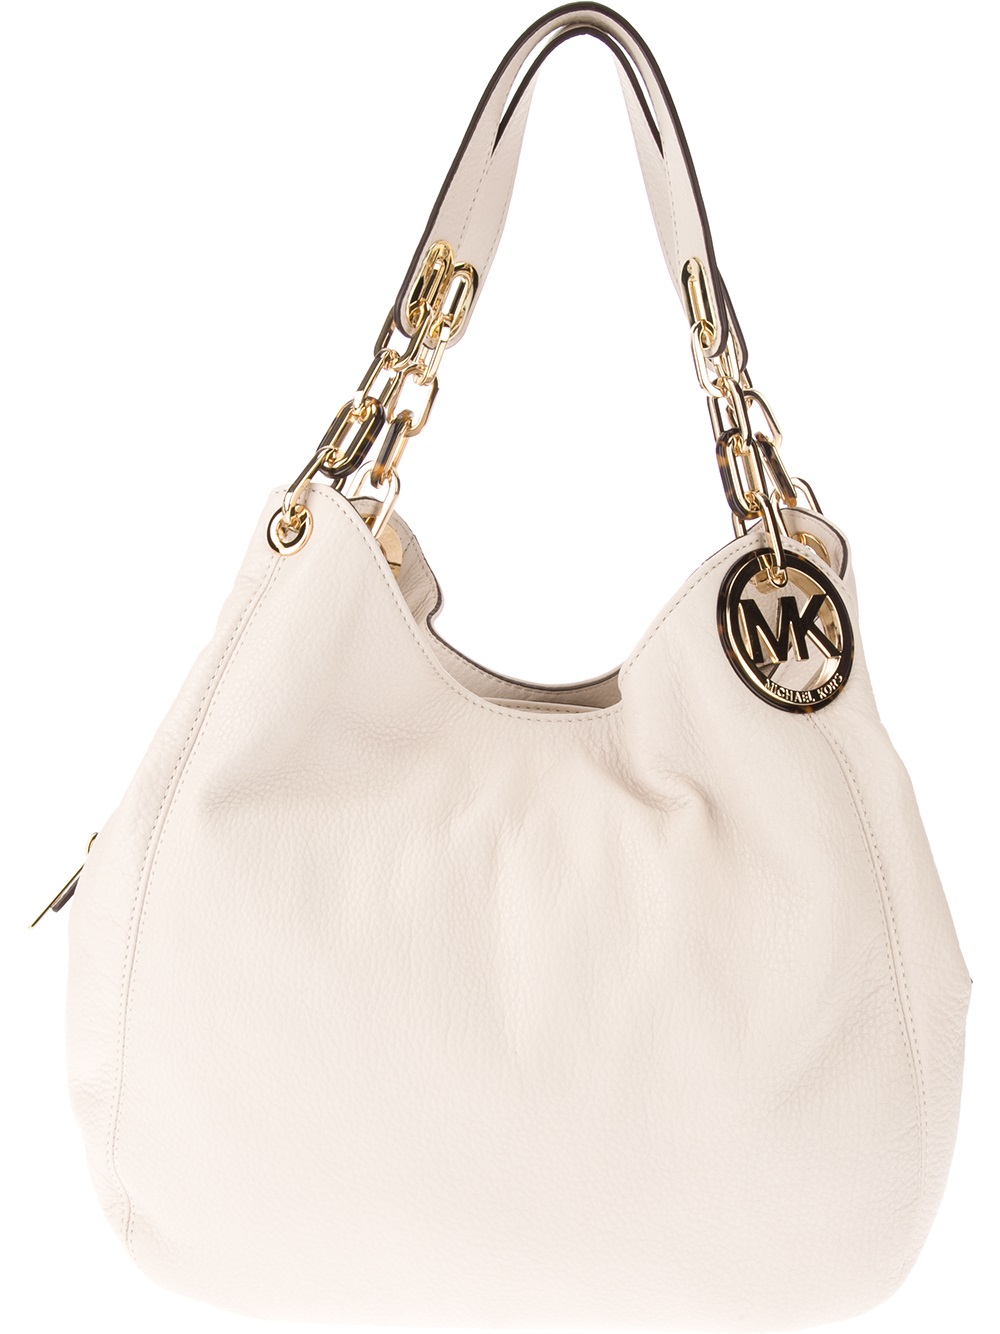 Michael kors Slouch Tote Bag in White | Lyst